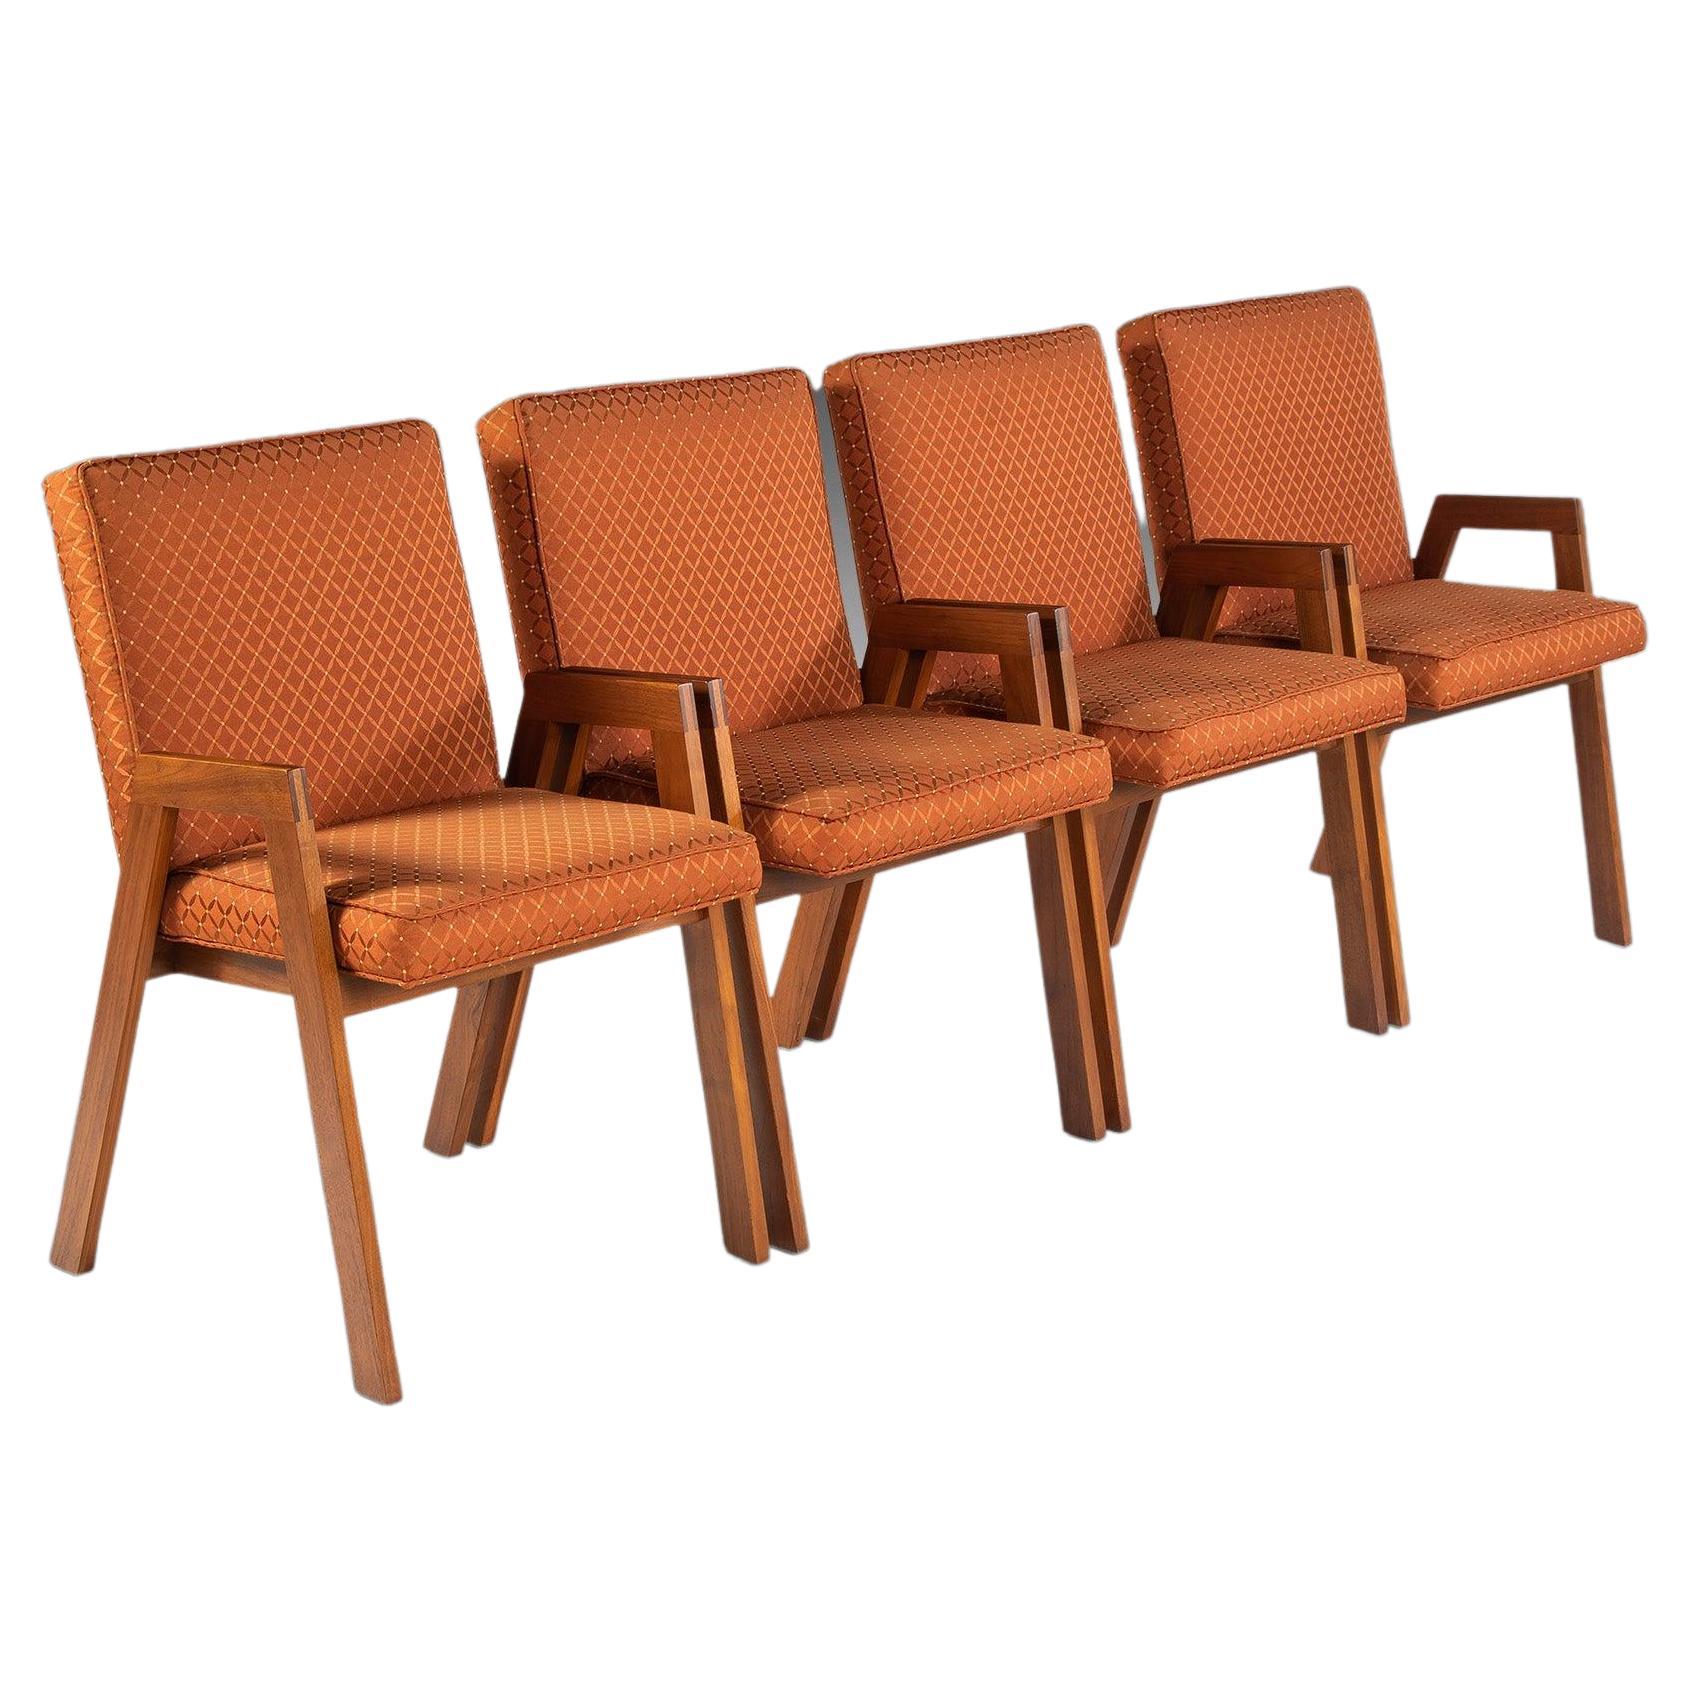 Set of Four '4' Compass Style Dining Chairs After Jens Risom, C. 1960s For Sale